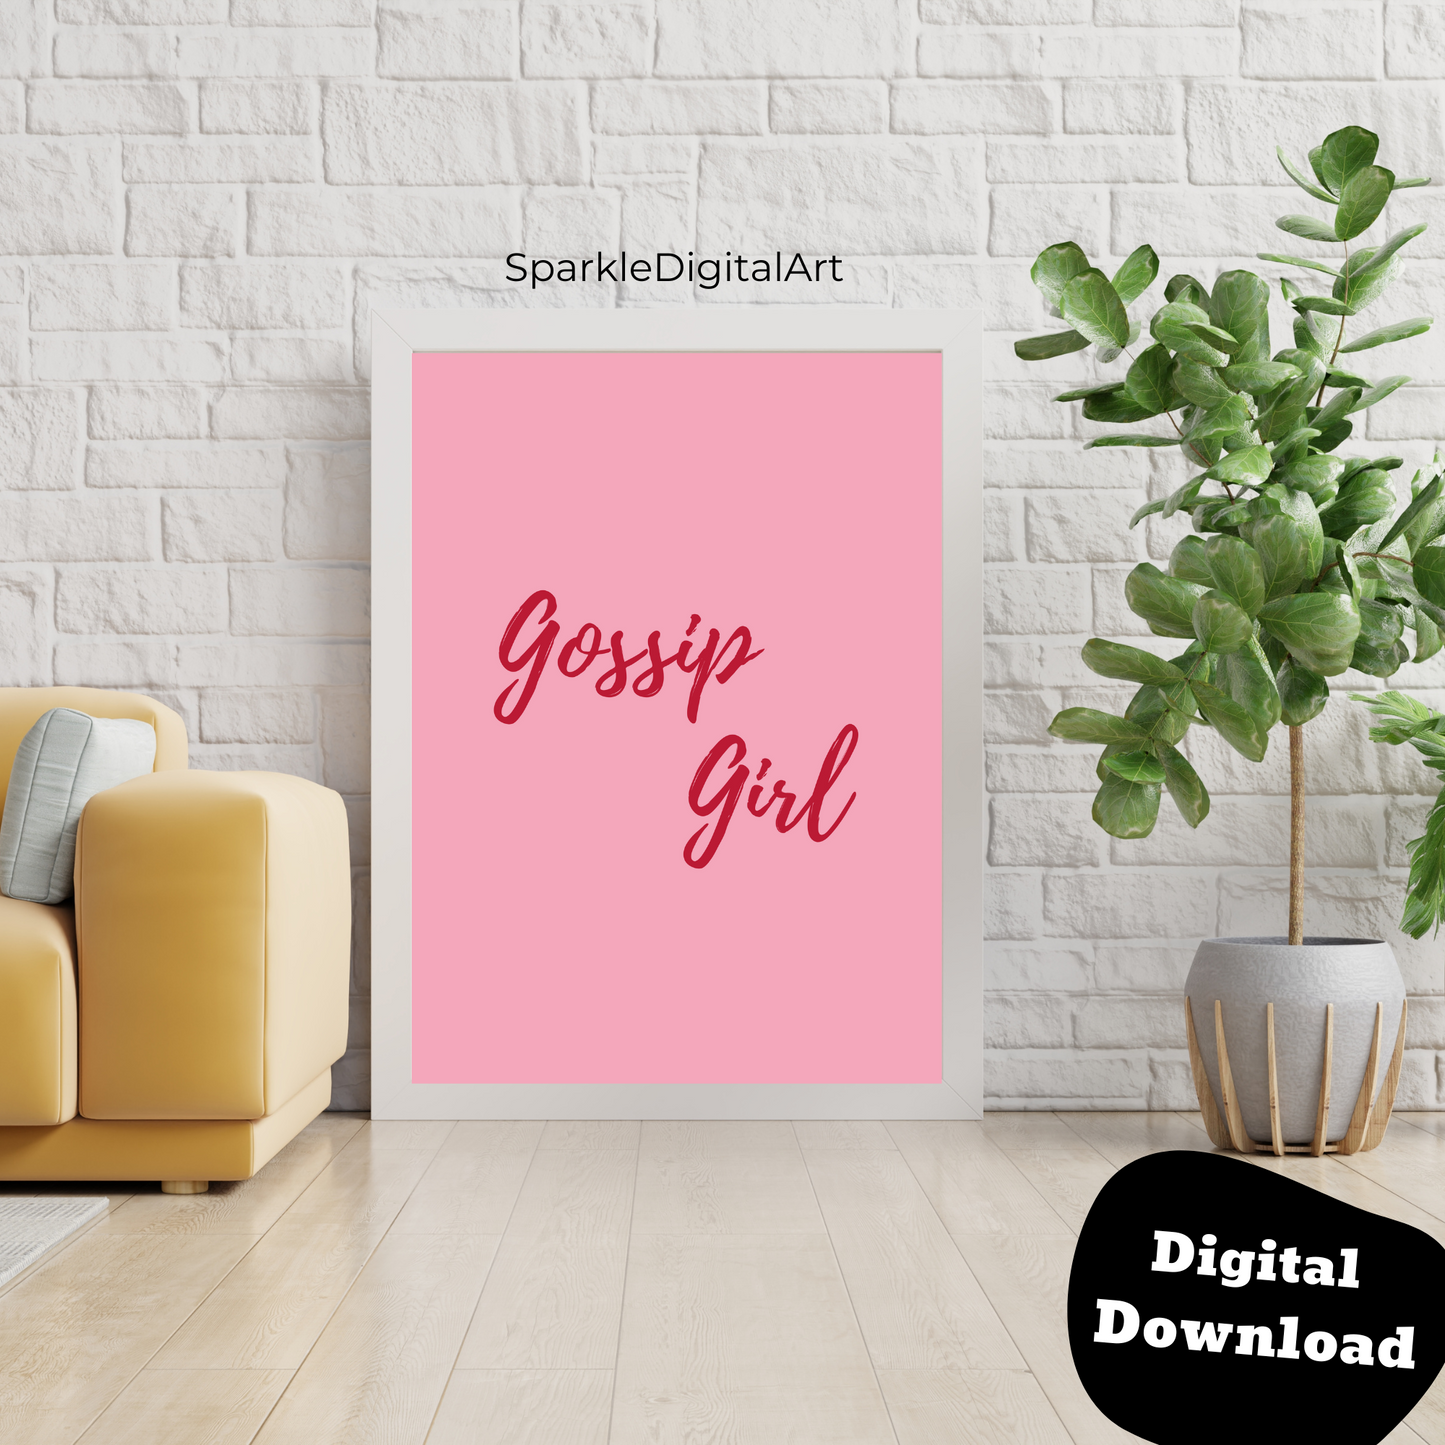 Gossip Girl Red and Pink Minimalist Set of 3 Wall Art